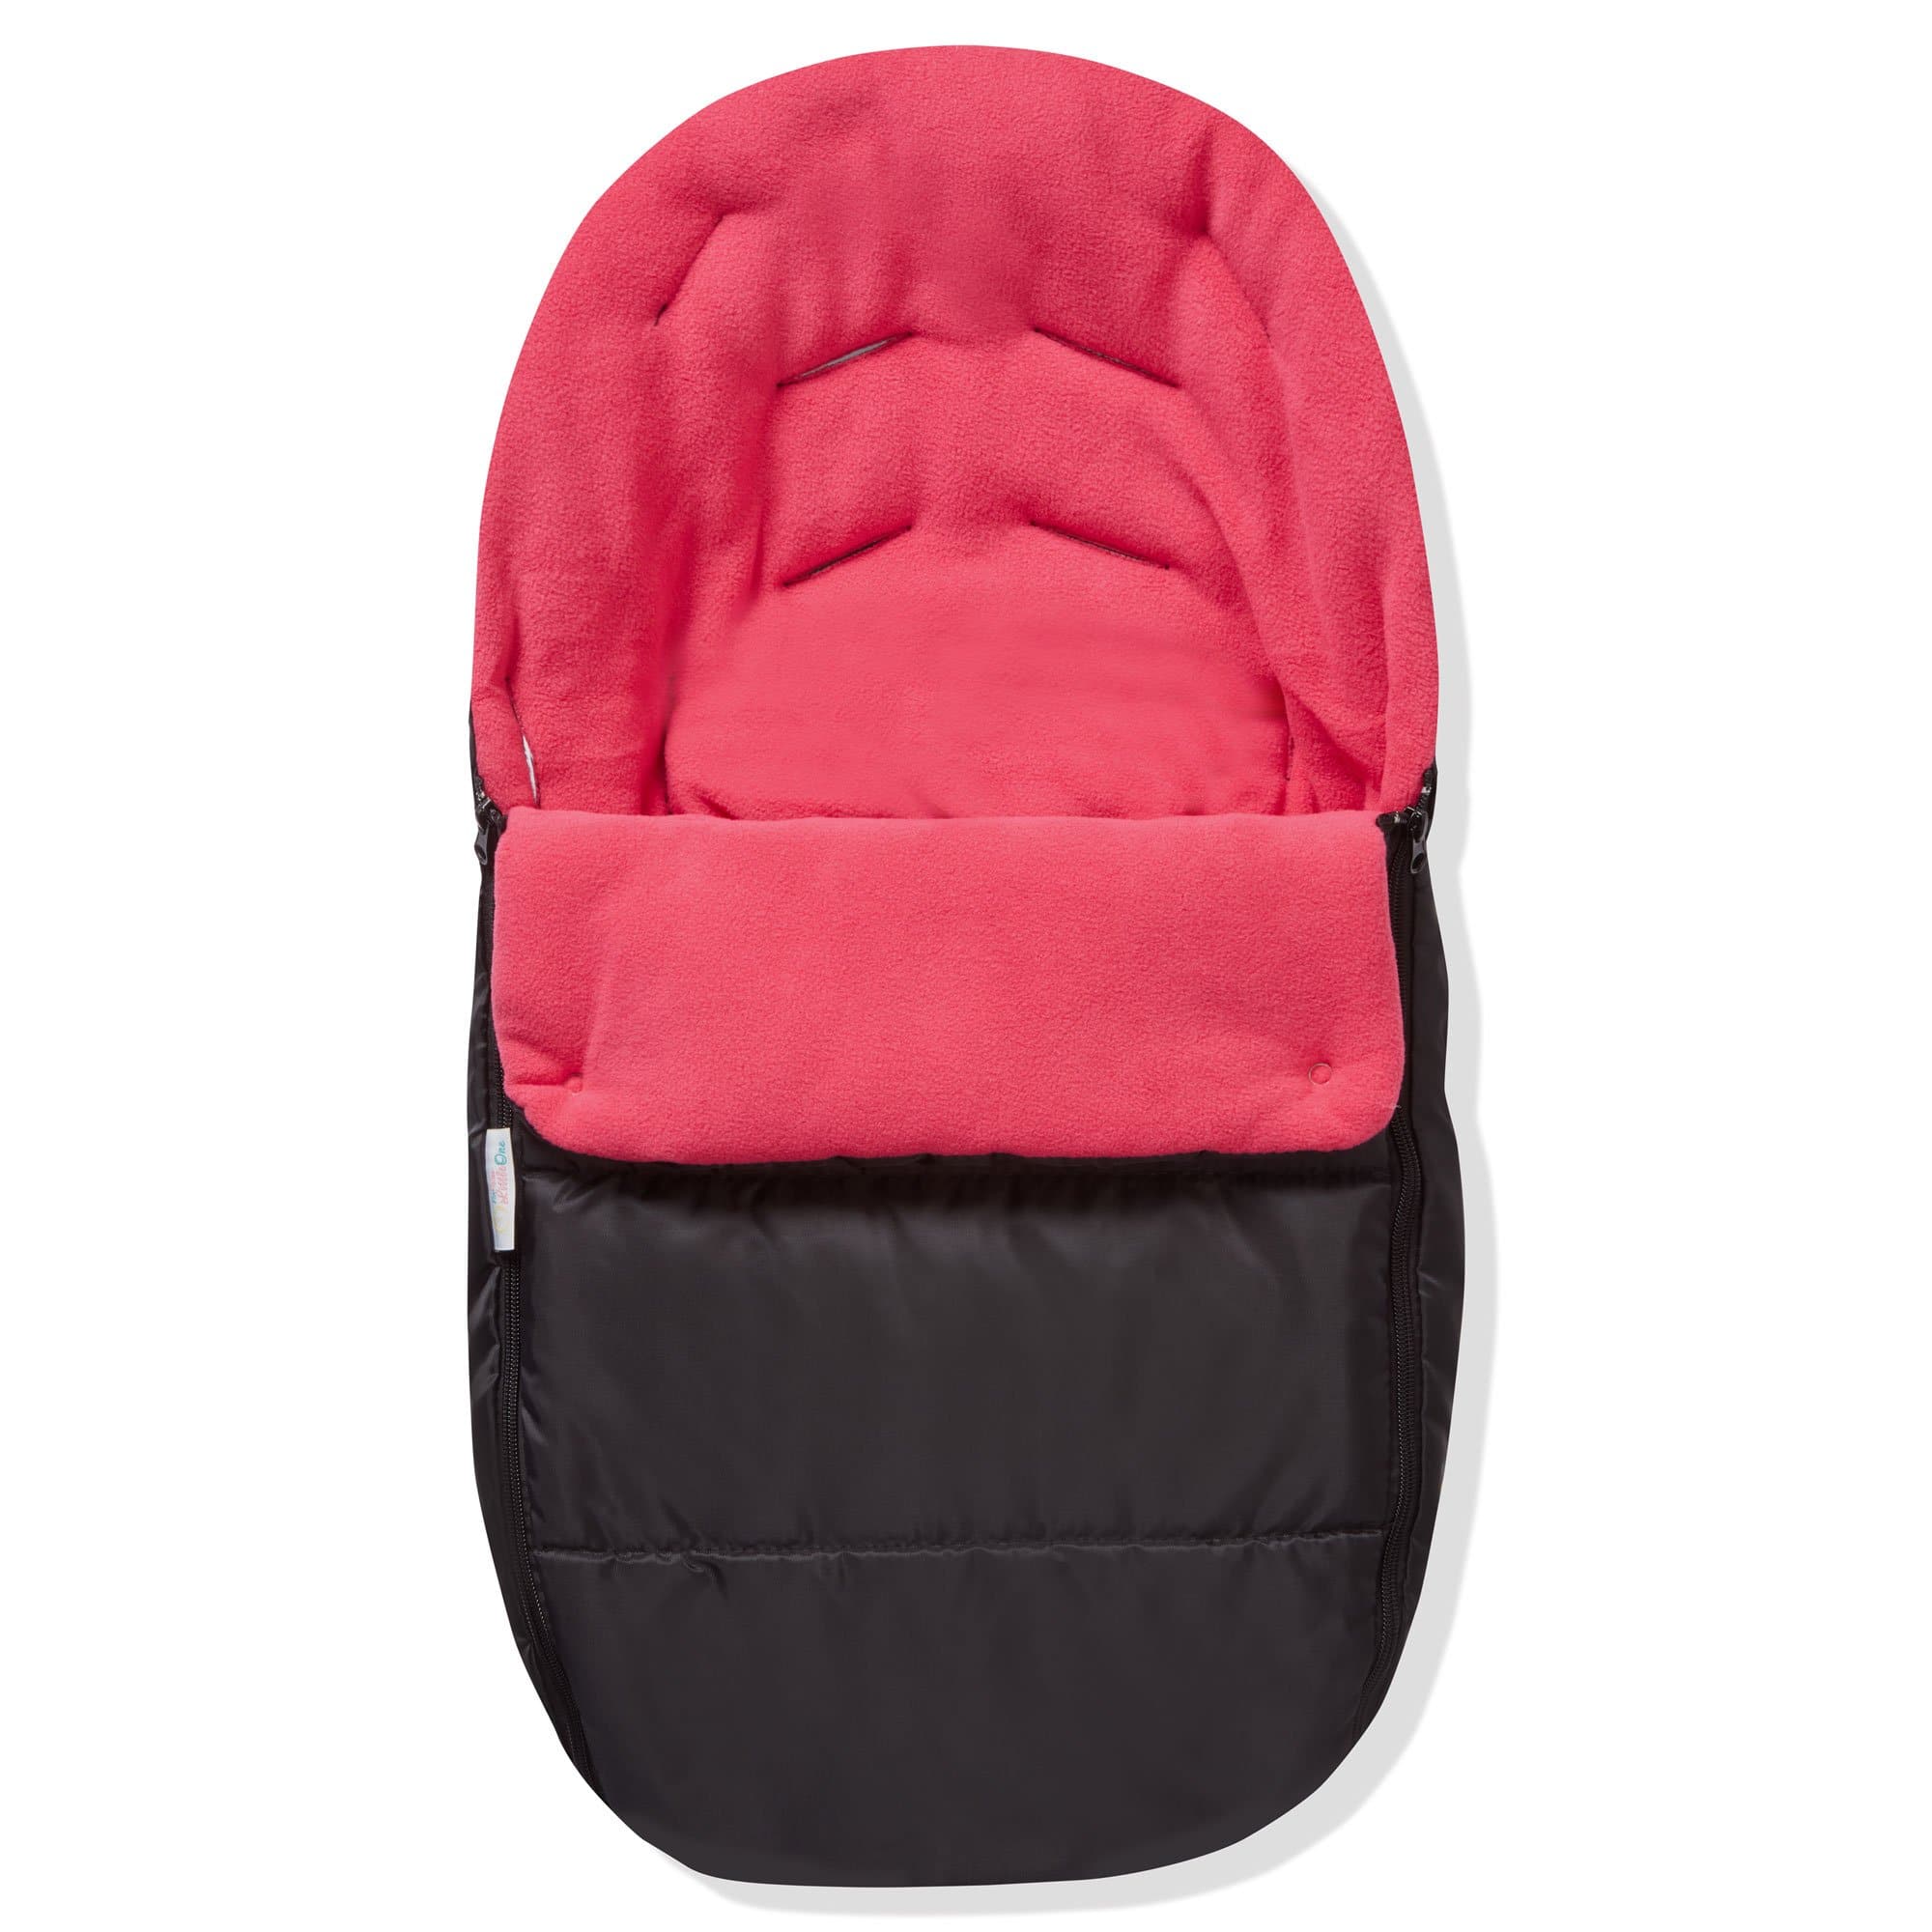 Premium Car Seat Footmuff / Cosy Toes Compatible with Babystyle - For Your Little One